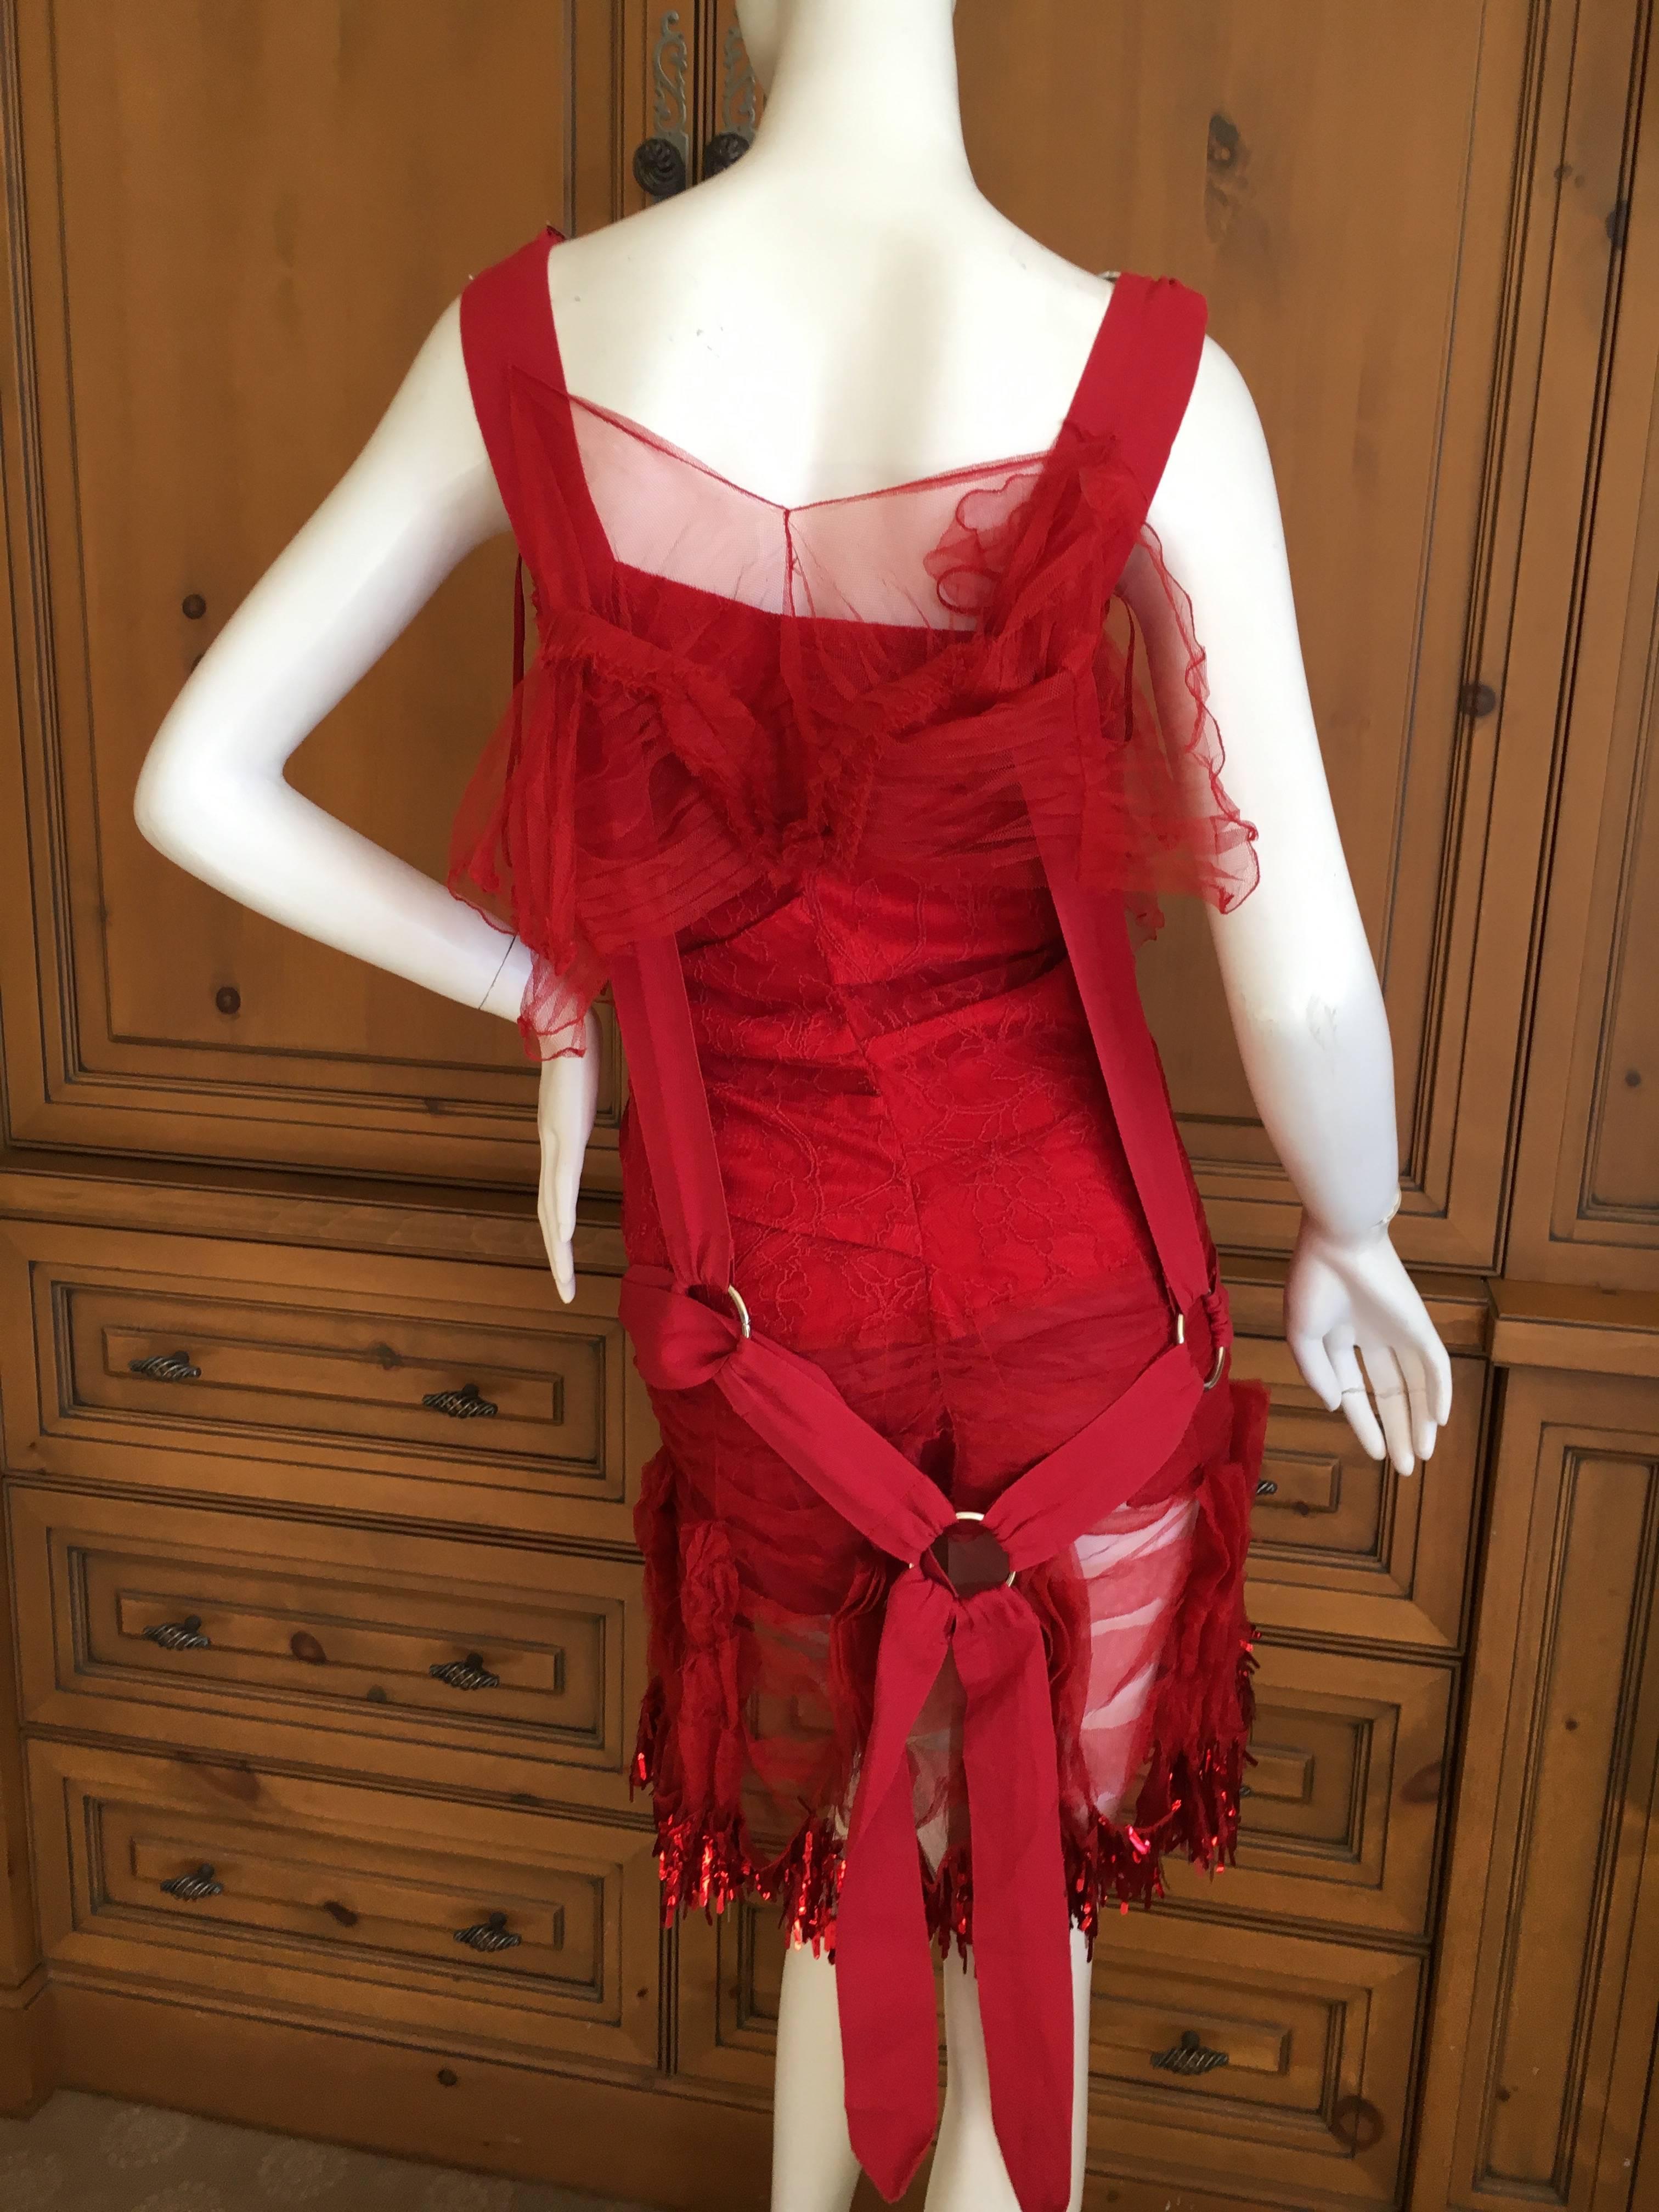 Women's Dior by Galliano Sequin Accented Red Lace Cocktail Dress with Bondage Straps